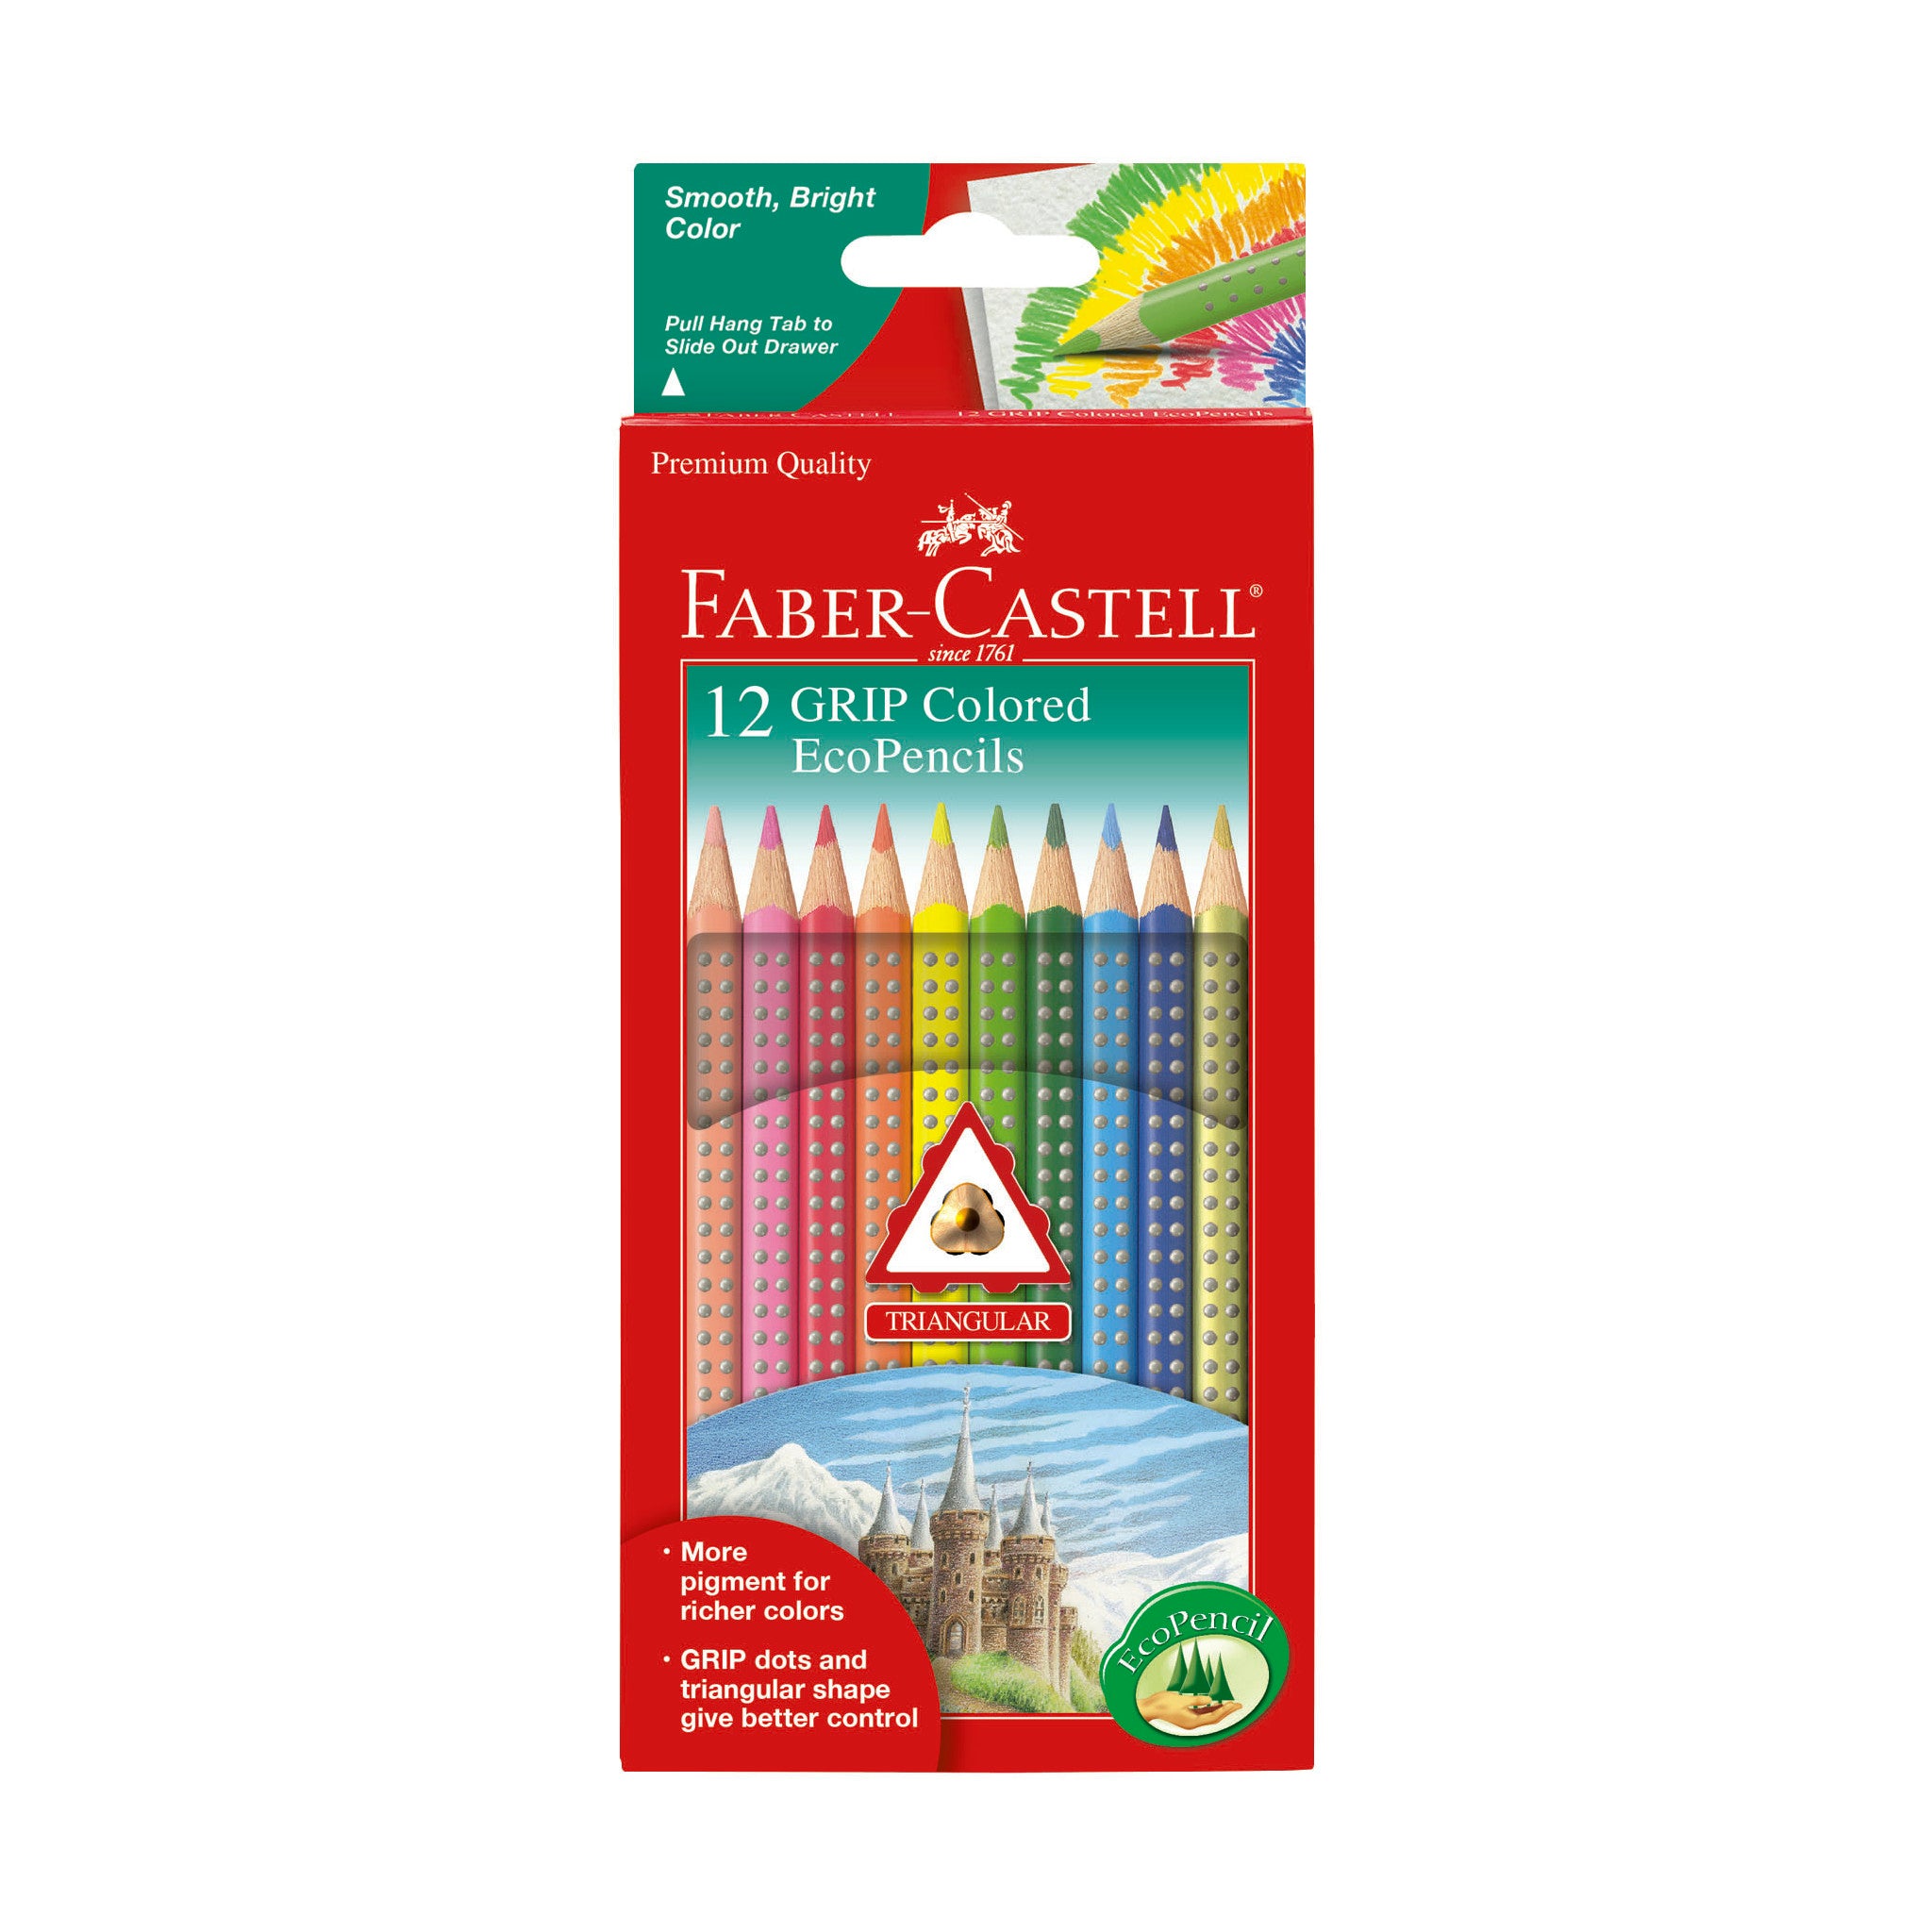 Faber-Castell Grip Graphite EcoPencils with Eraser - 12 Count - No. 2.5  Multi, 8 mm